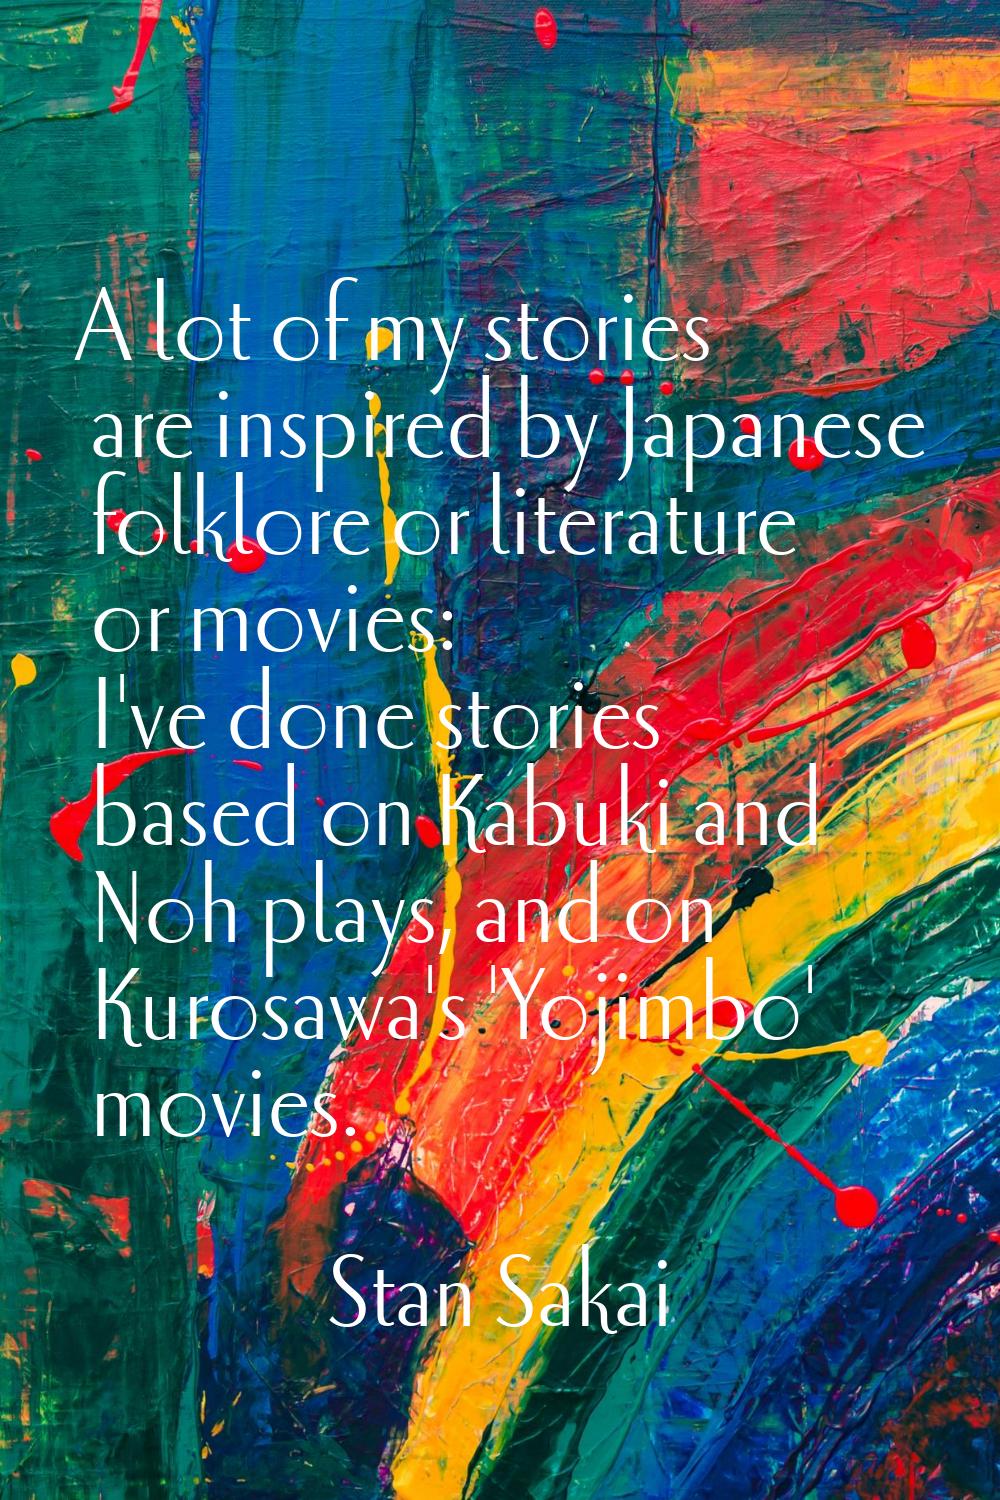 A lot of my stories are inspired by Japanese folklore or literature or movies: I've done stories ba